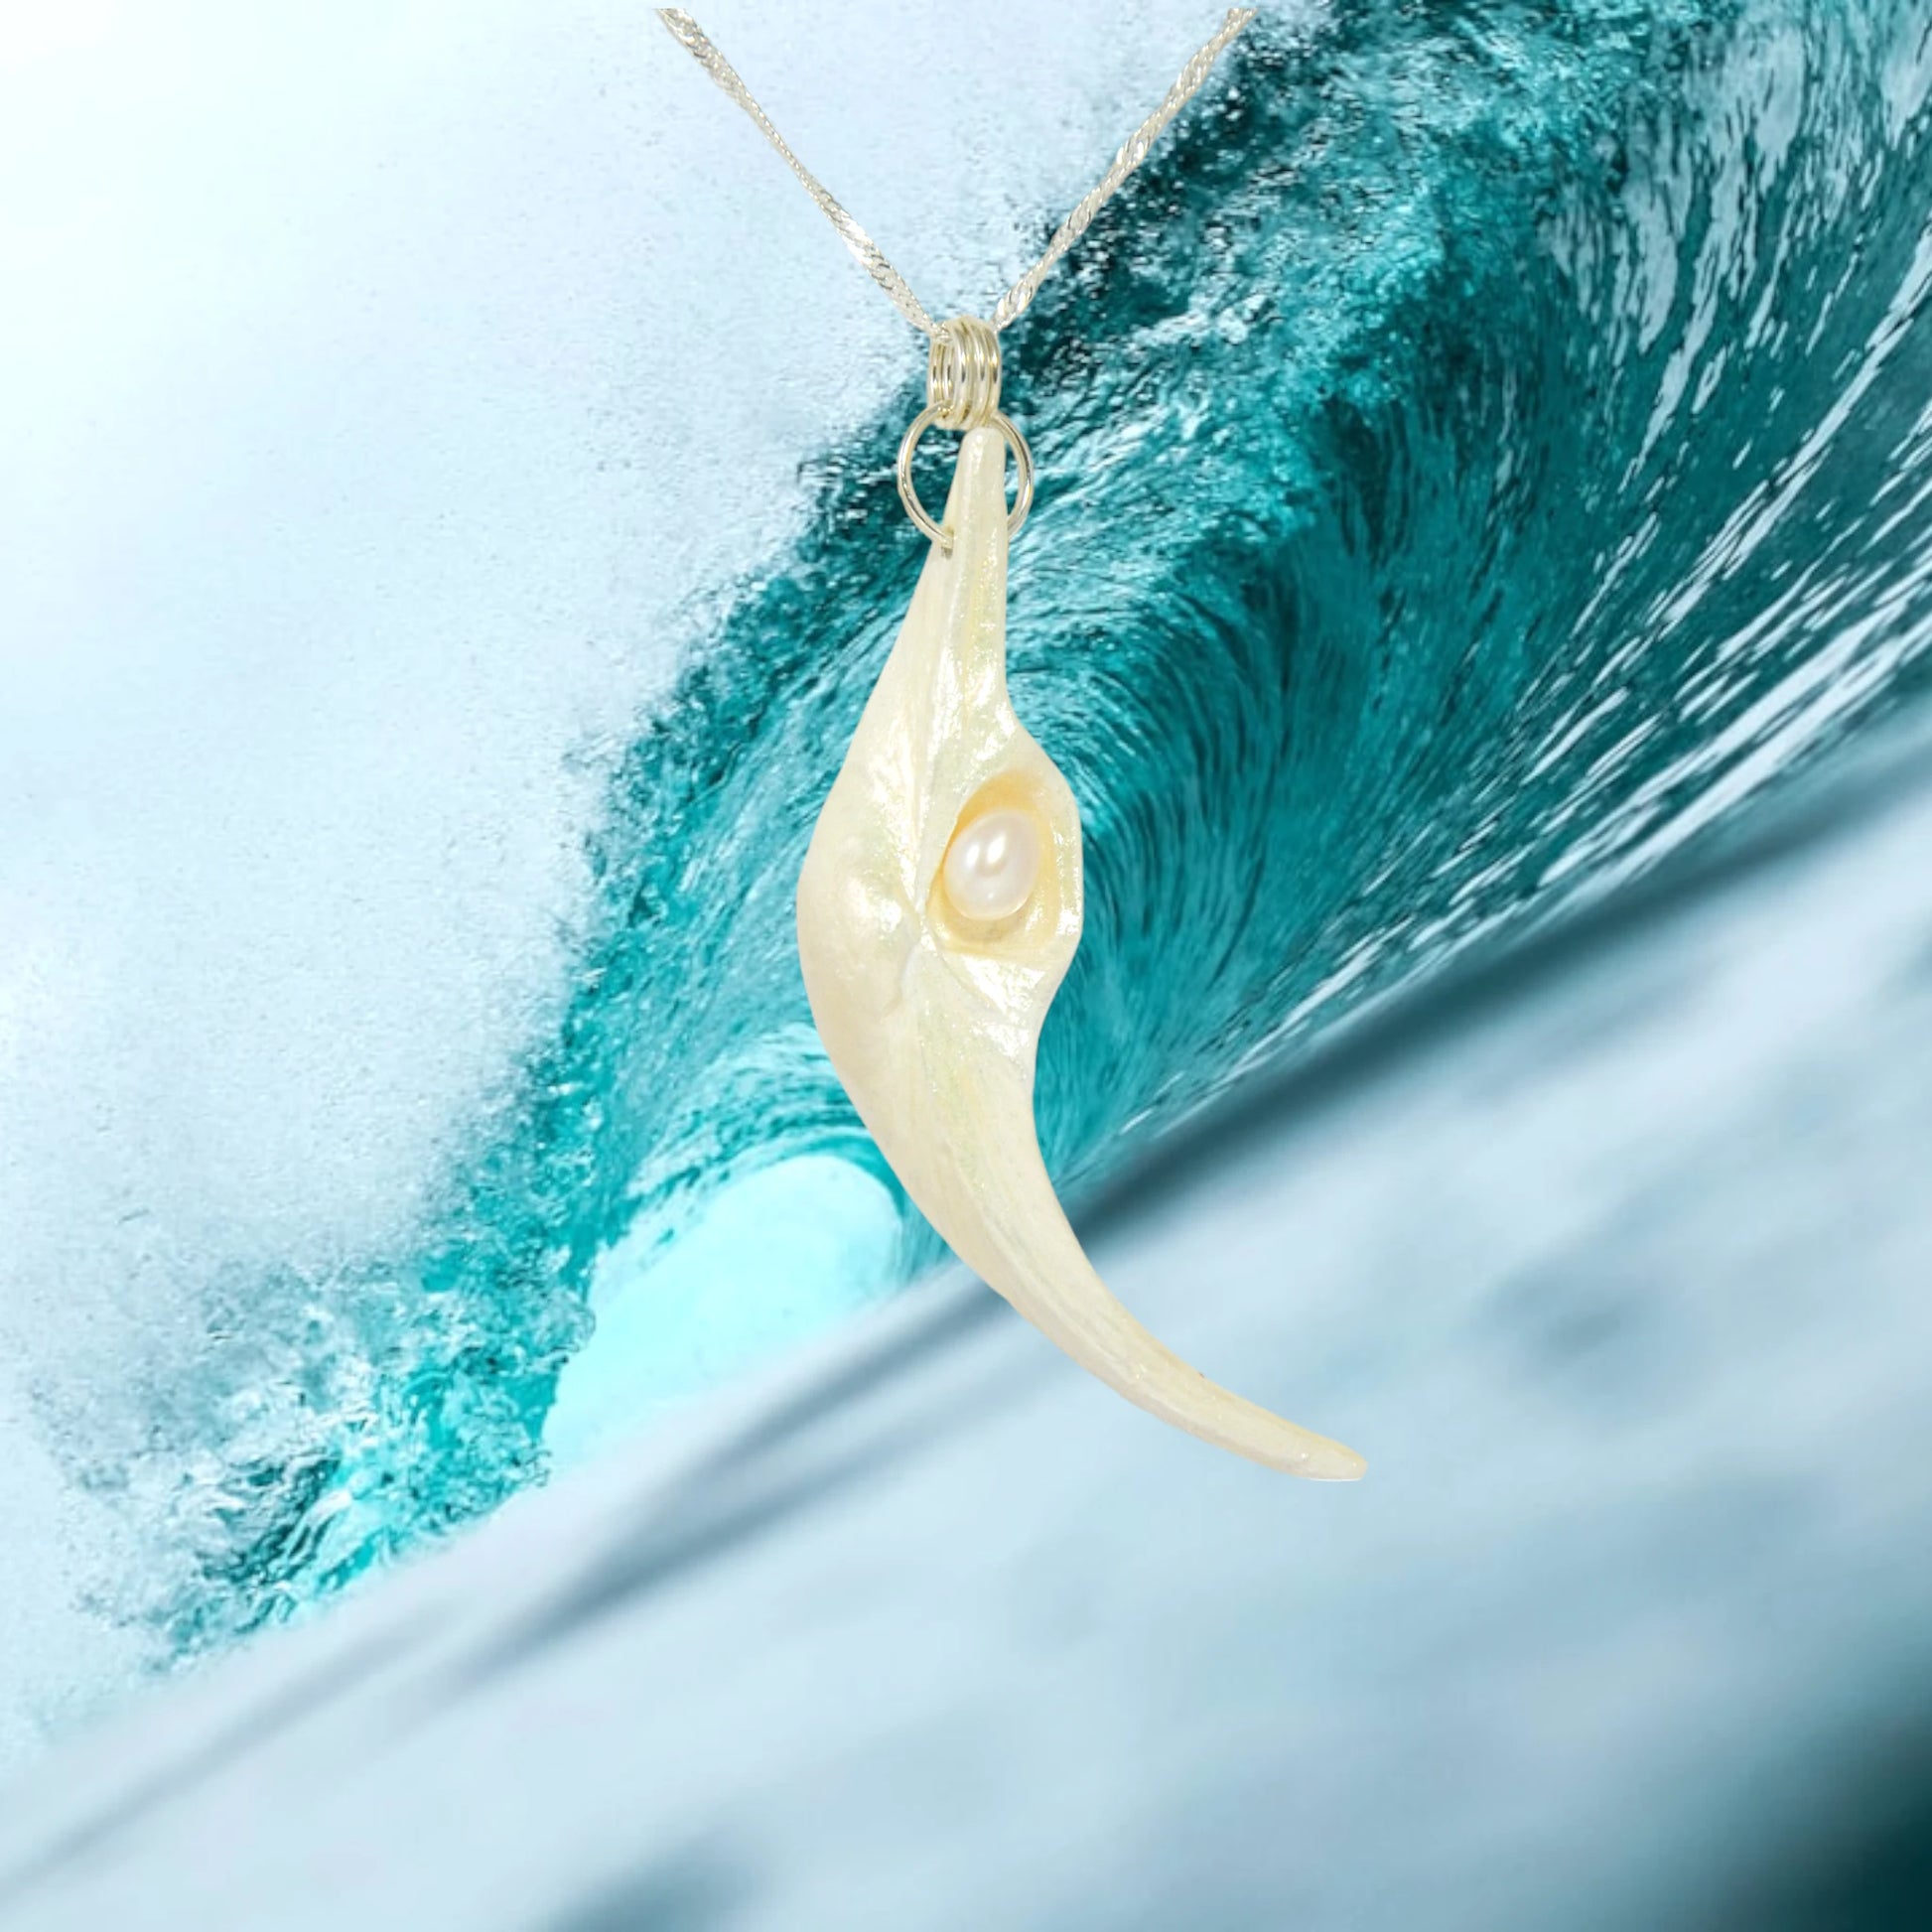 Jupiter is a natural seashell pendant with a real freshwater pearl. The background is of a ocean wave.